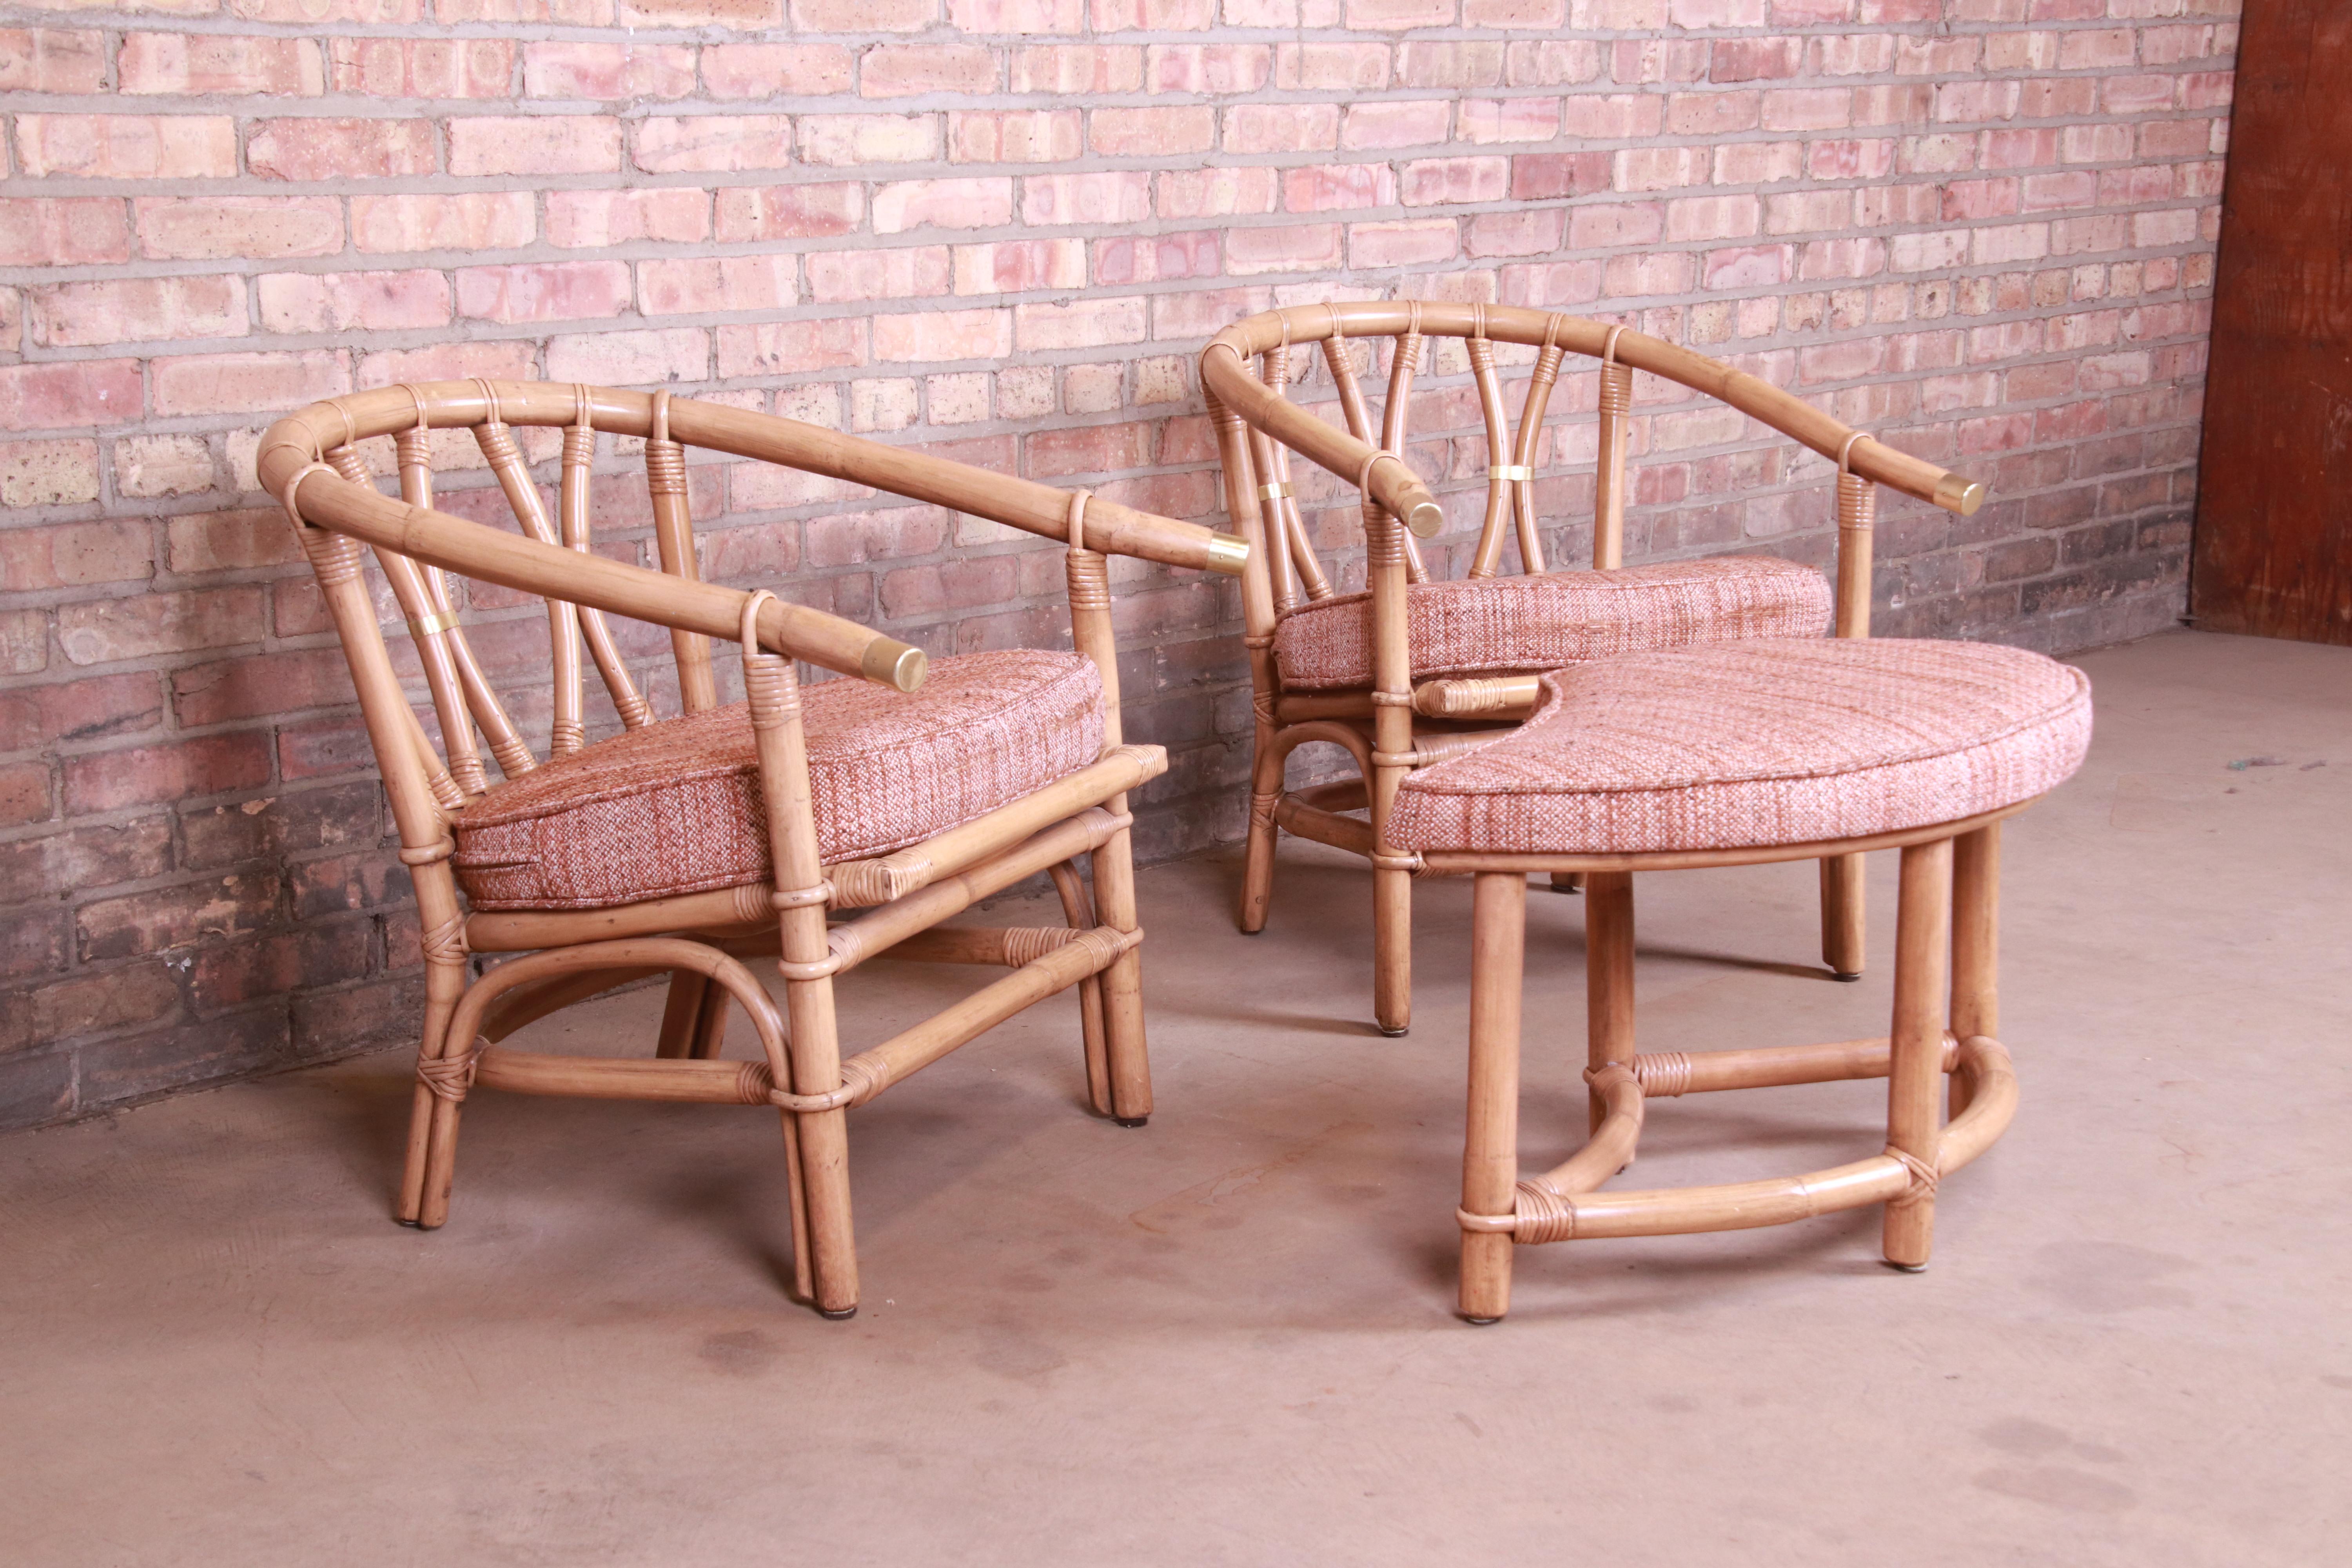 20th Century McGuire Style Organic Modern Bamboo Rattan Lounge Chairs with Ottoman